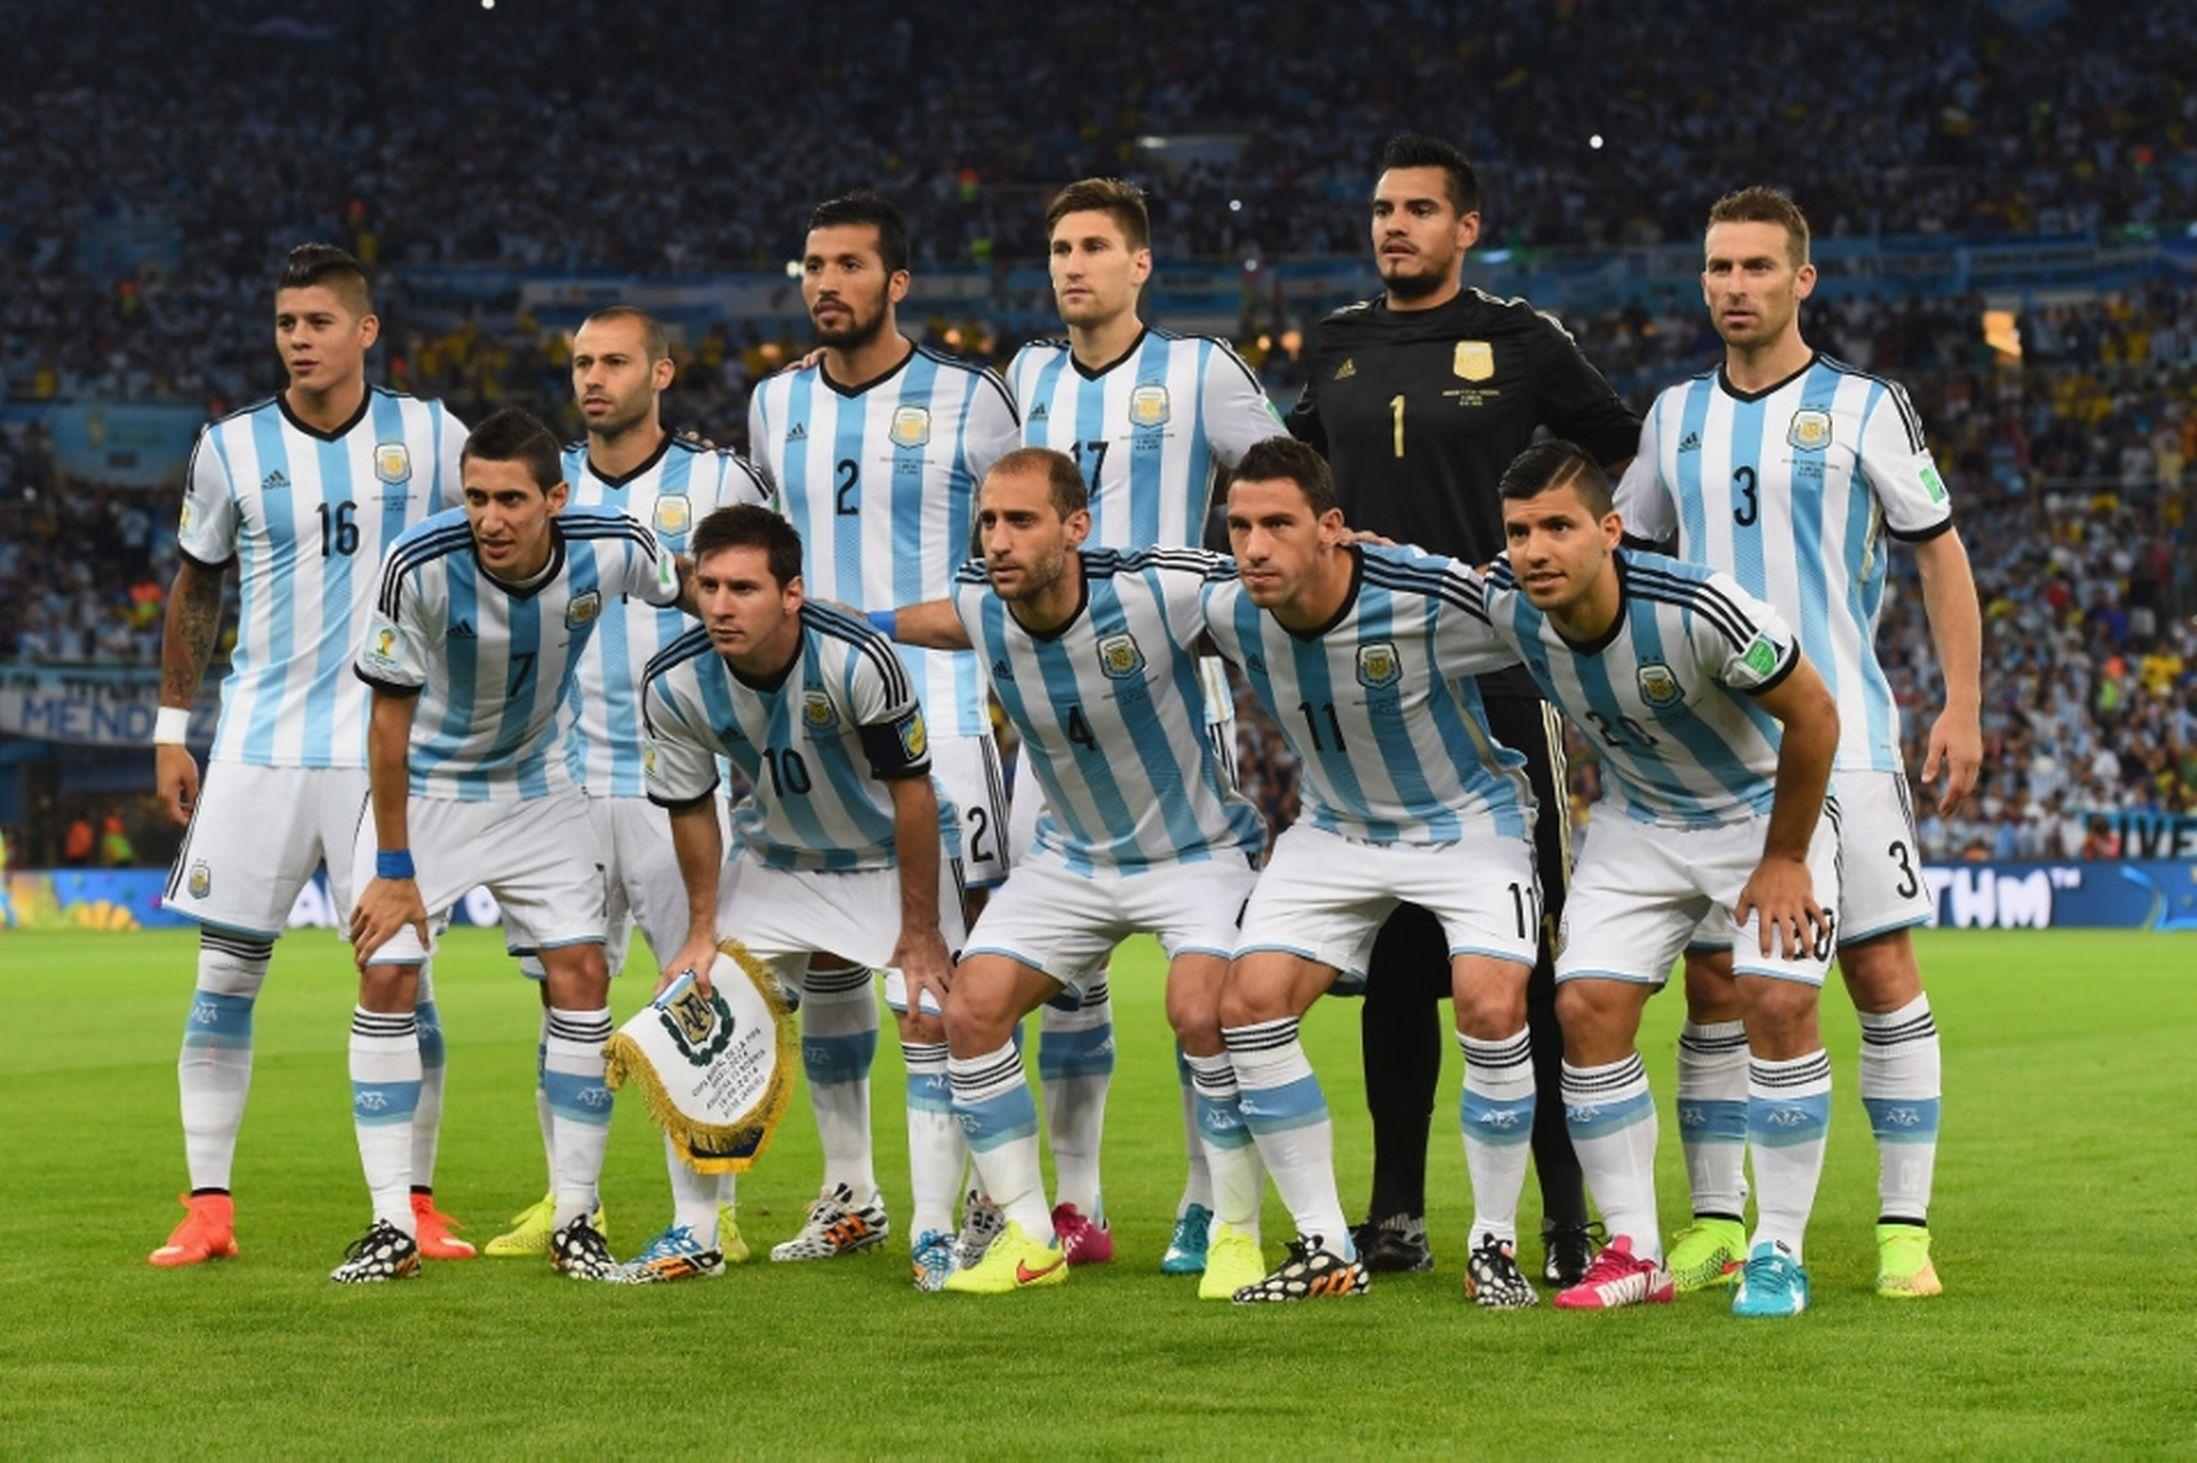 Argentina National Football Team Wallpapers - Wallpaper Cave